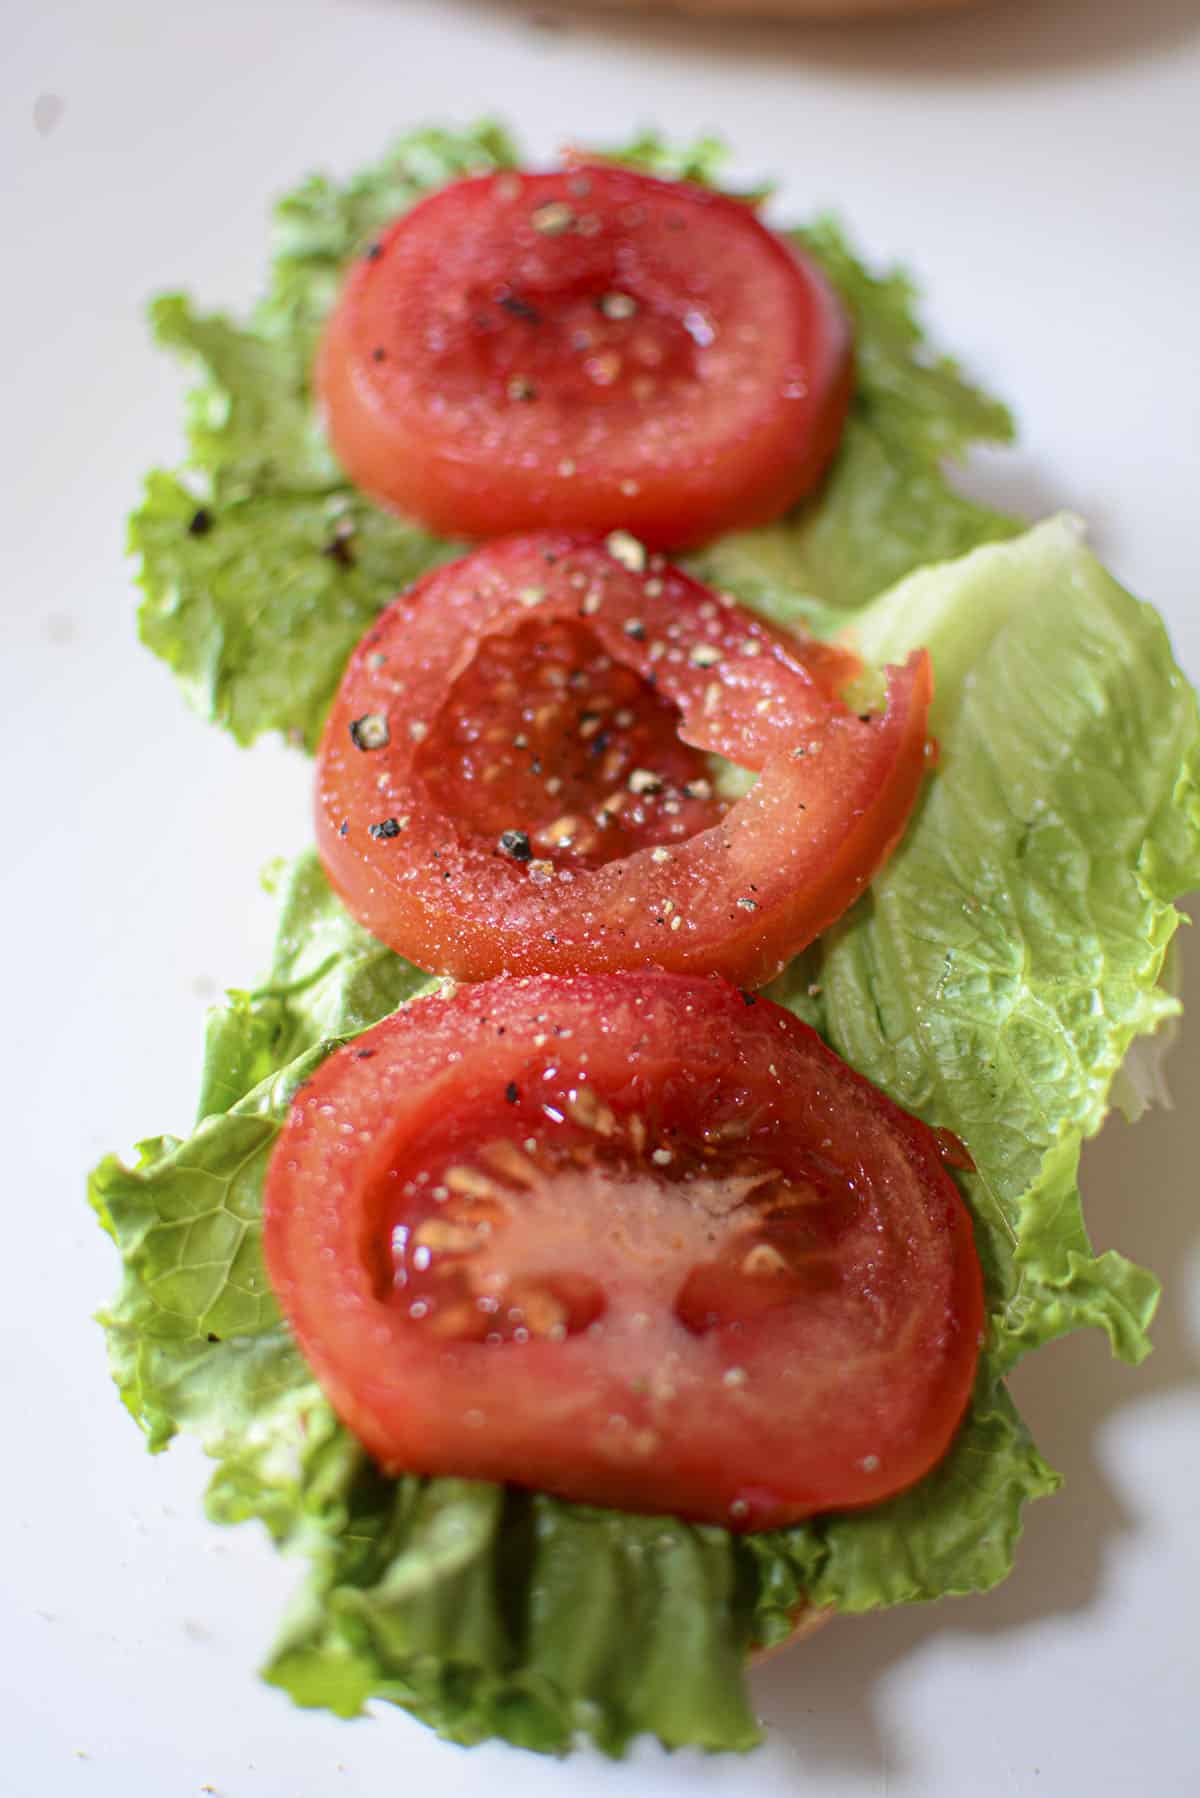 Tomatoes seasoned with salt and pepper are on top of the romaine lettuce.